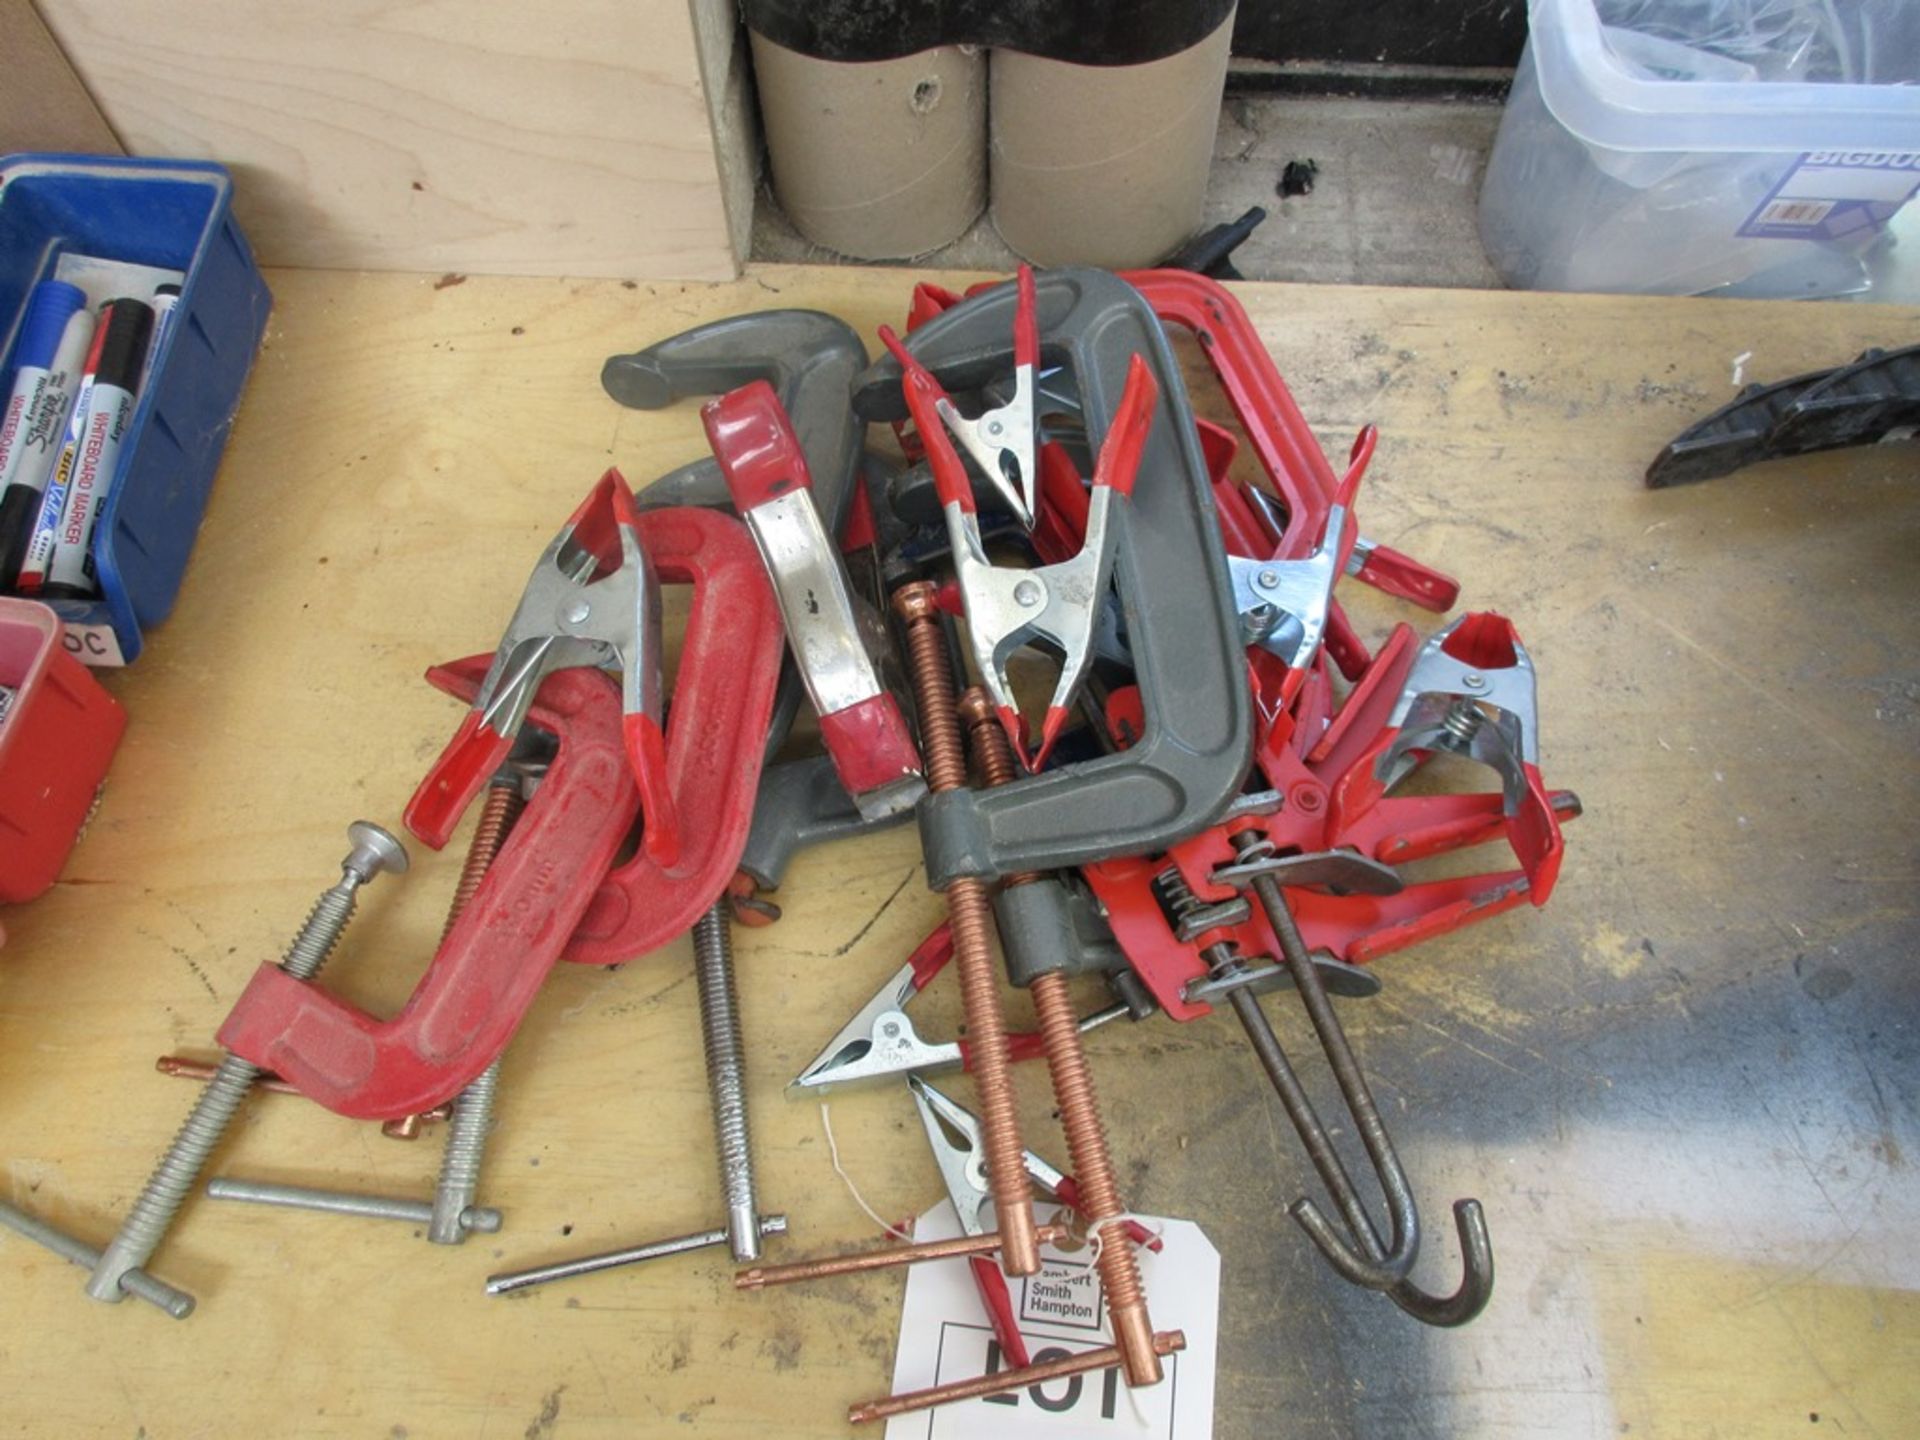 Quantity of 'G' clamps and clips